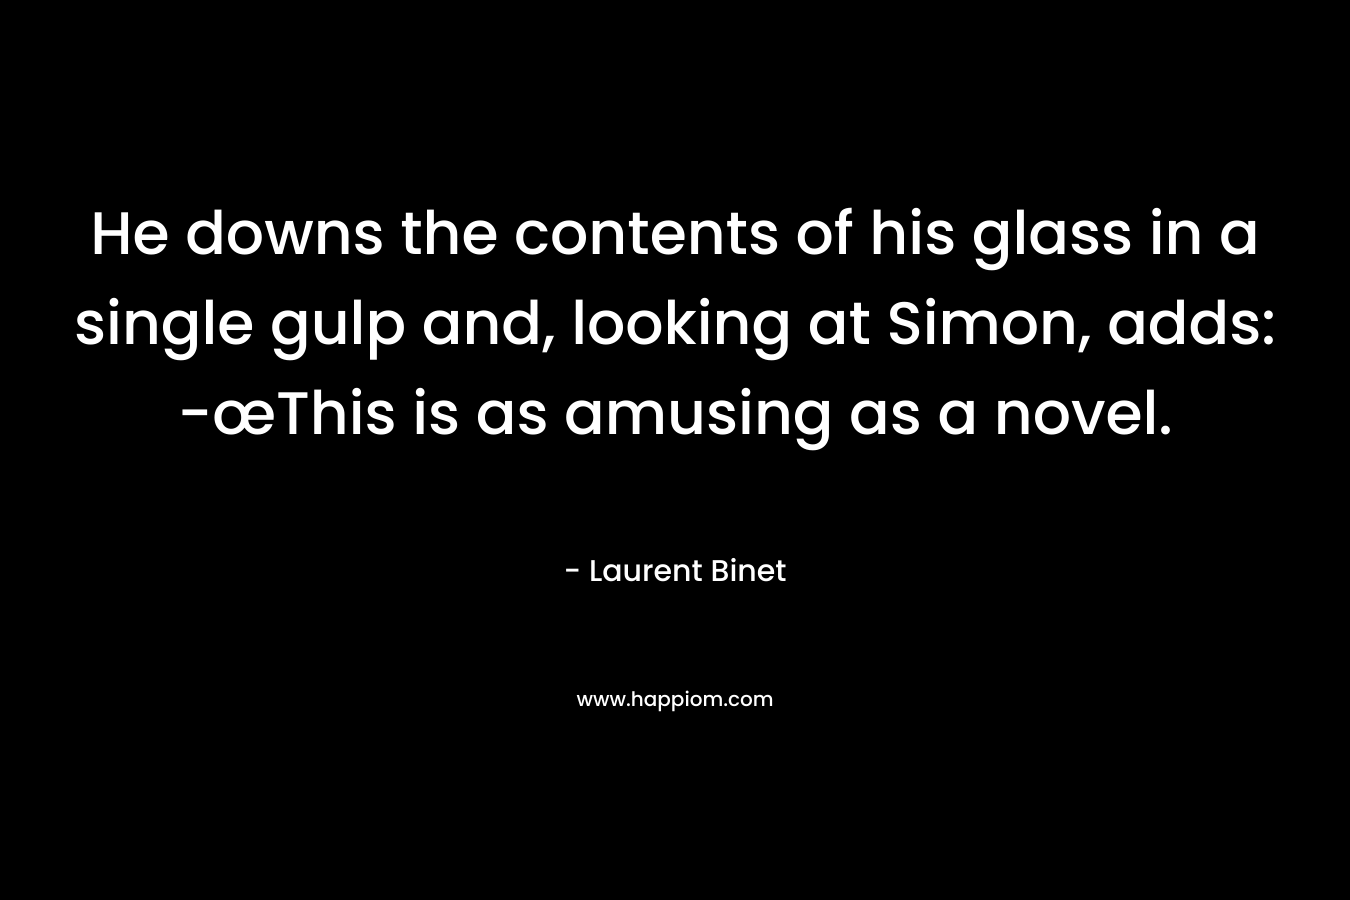 He downs the contents of his glass in a single gulp and, looking at Simon, adds: -œThis is as amusing as a novel. – Laurent Binet